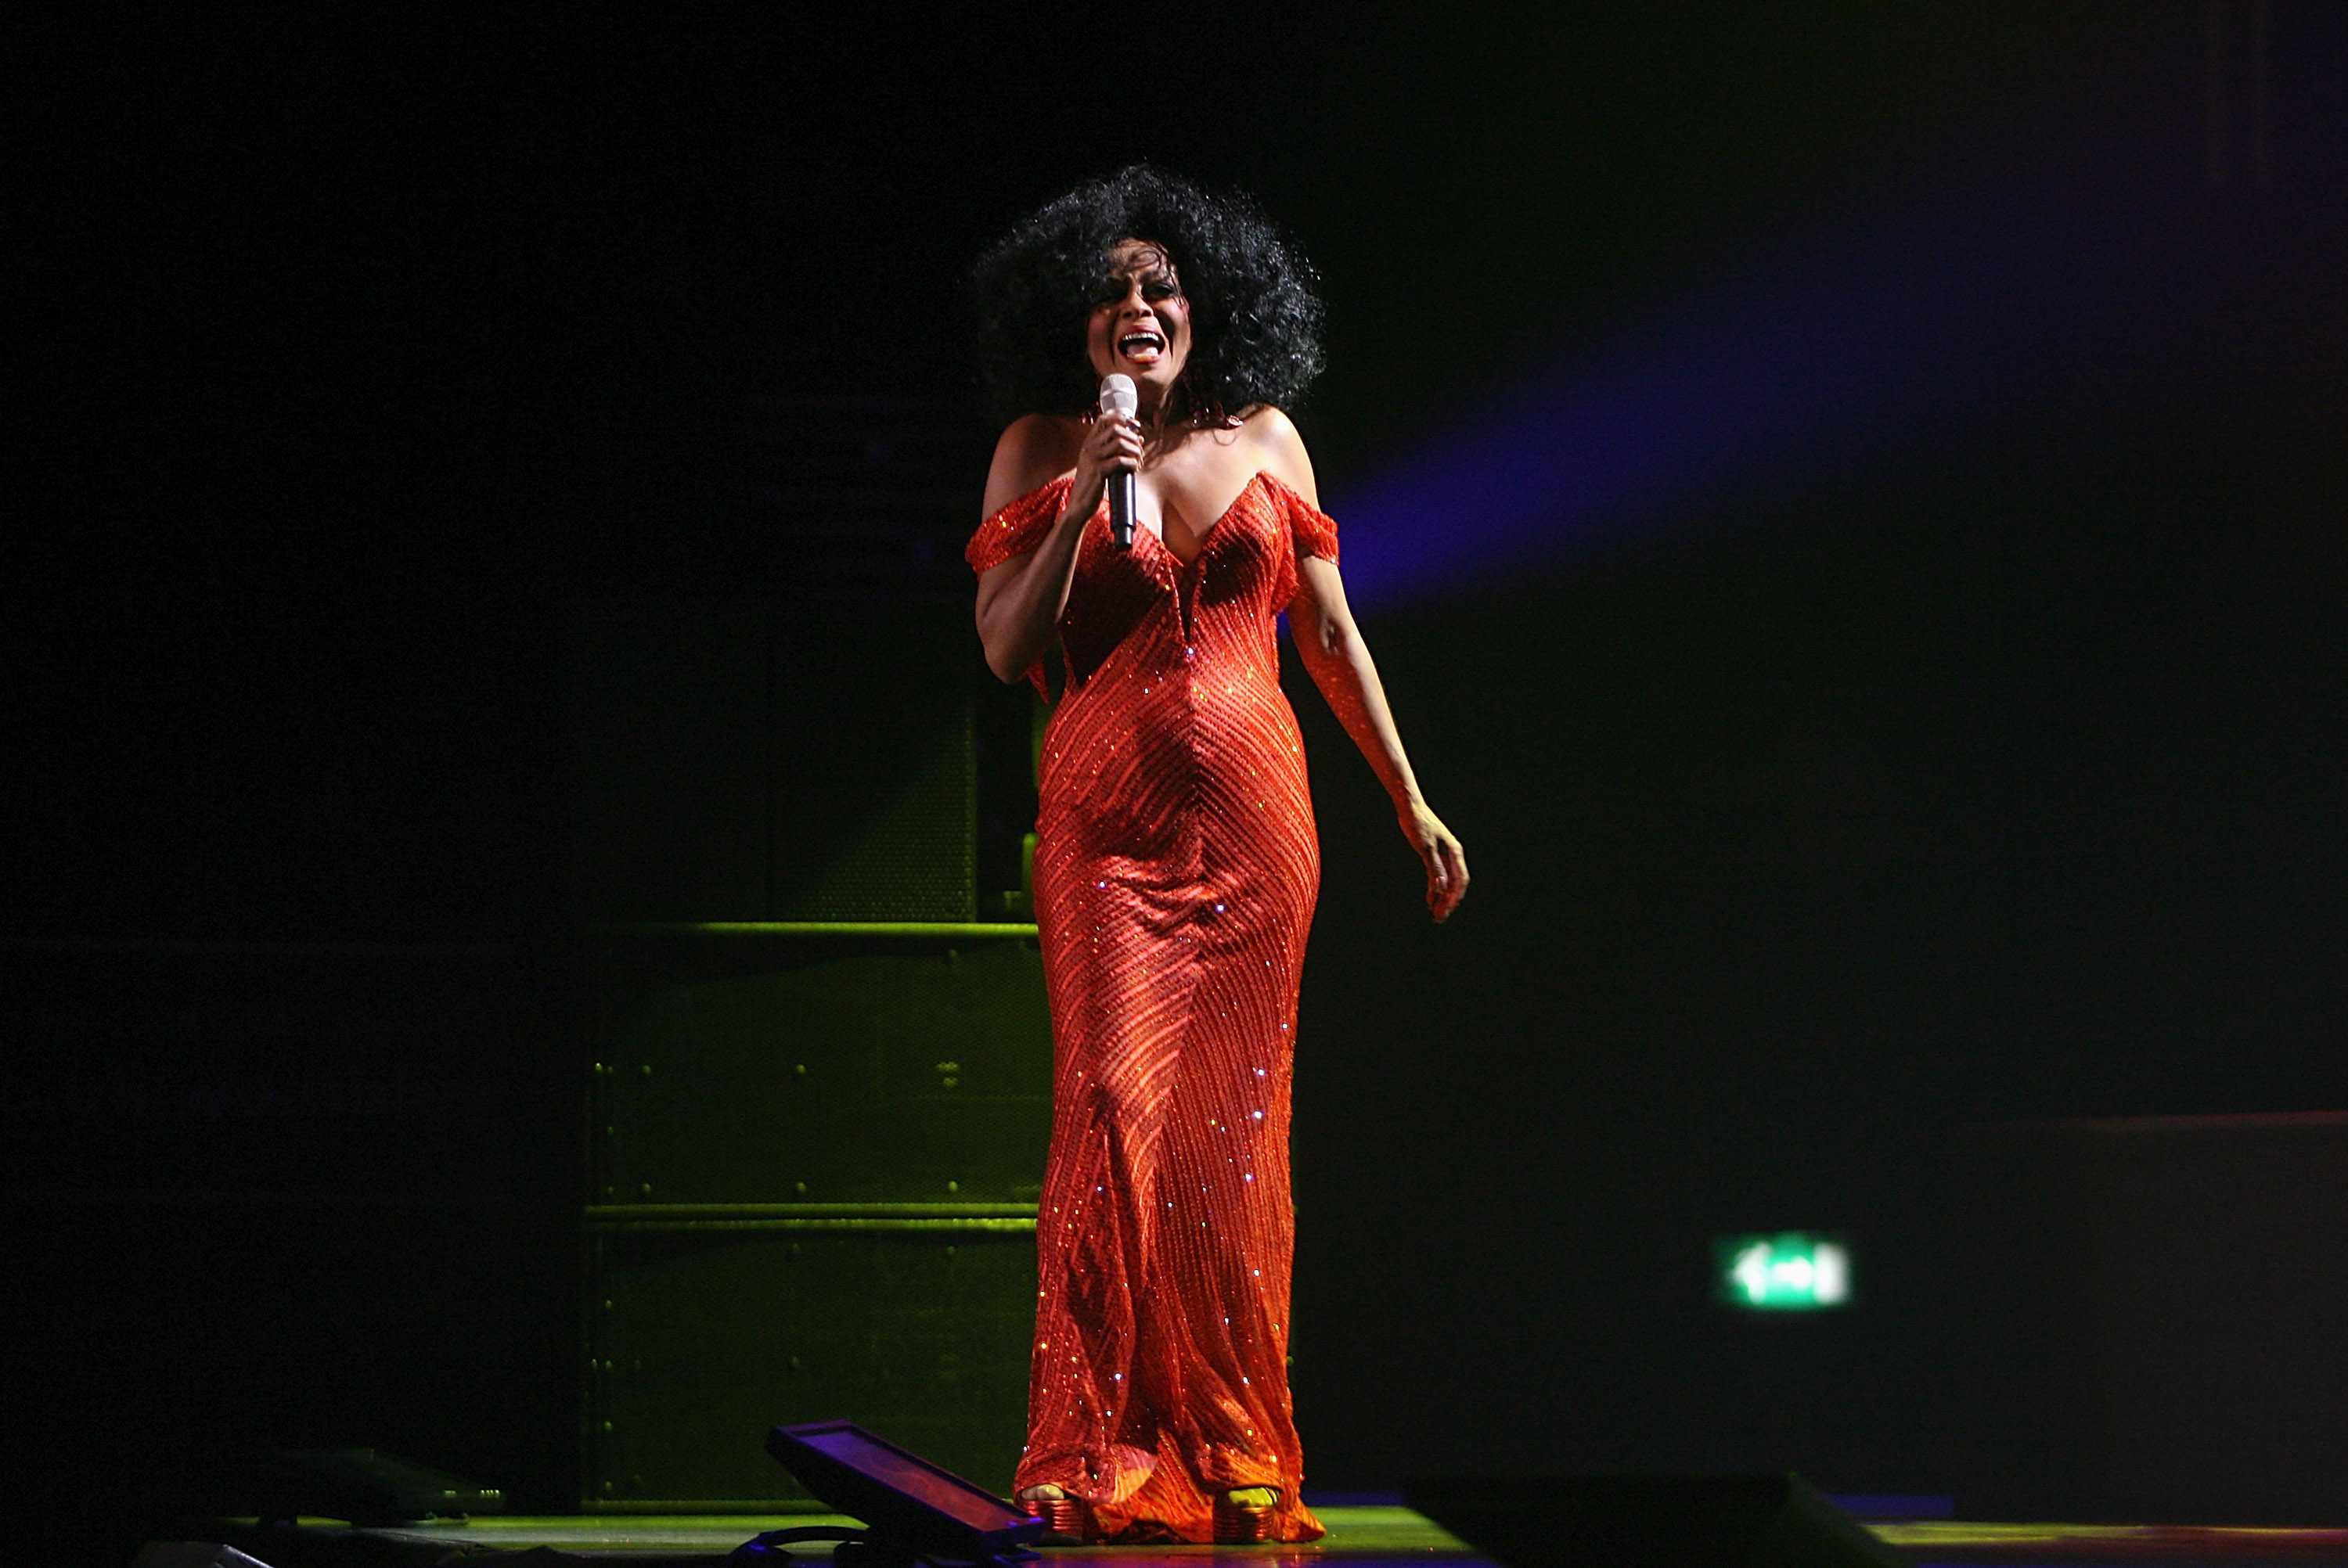 Diana Ross performs at Wembley Arena on May 9, 2007 in London, England.